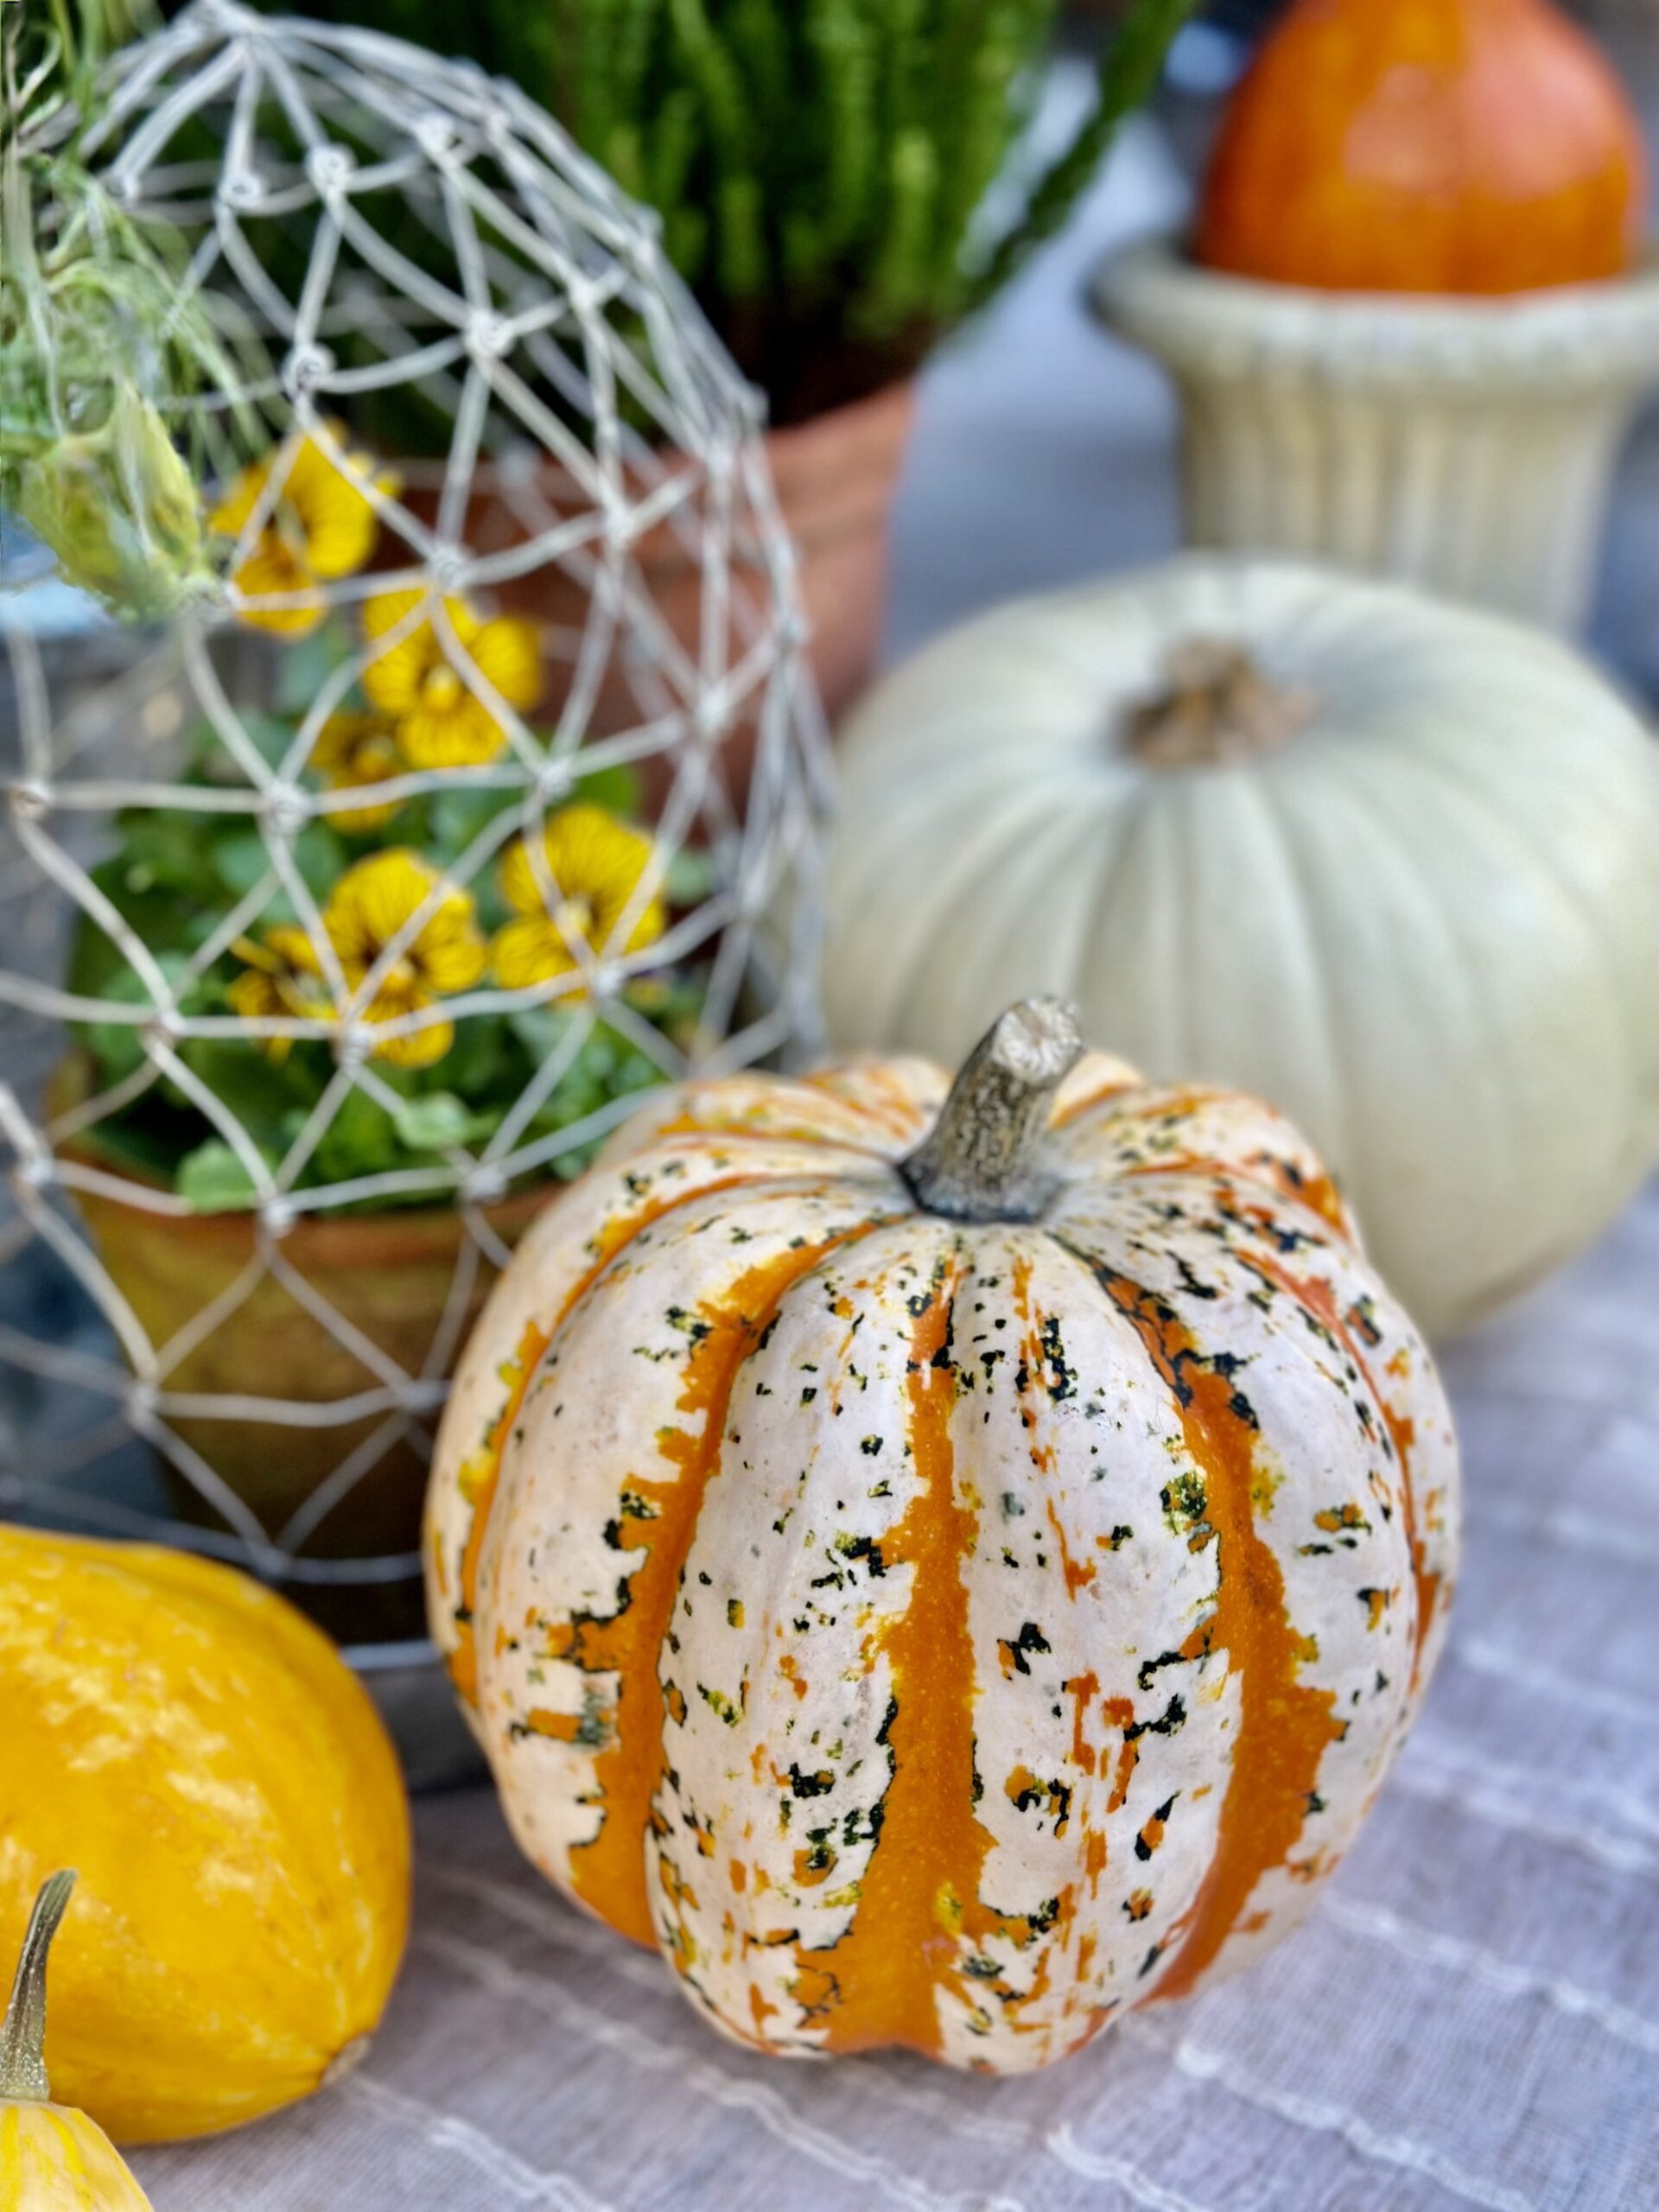 Perfect ornage white and green speckled pumpkin